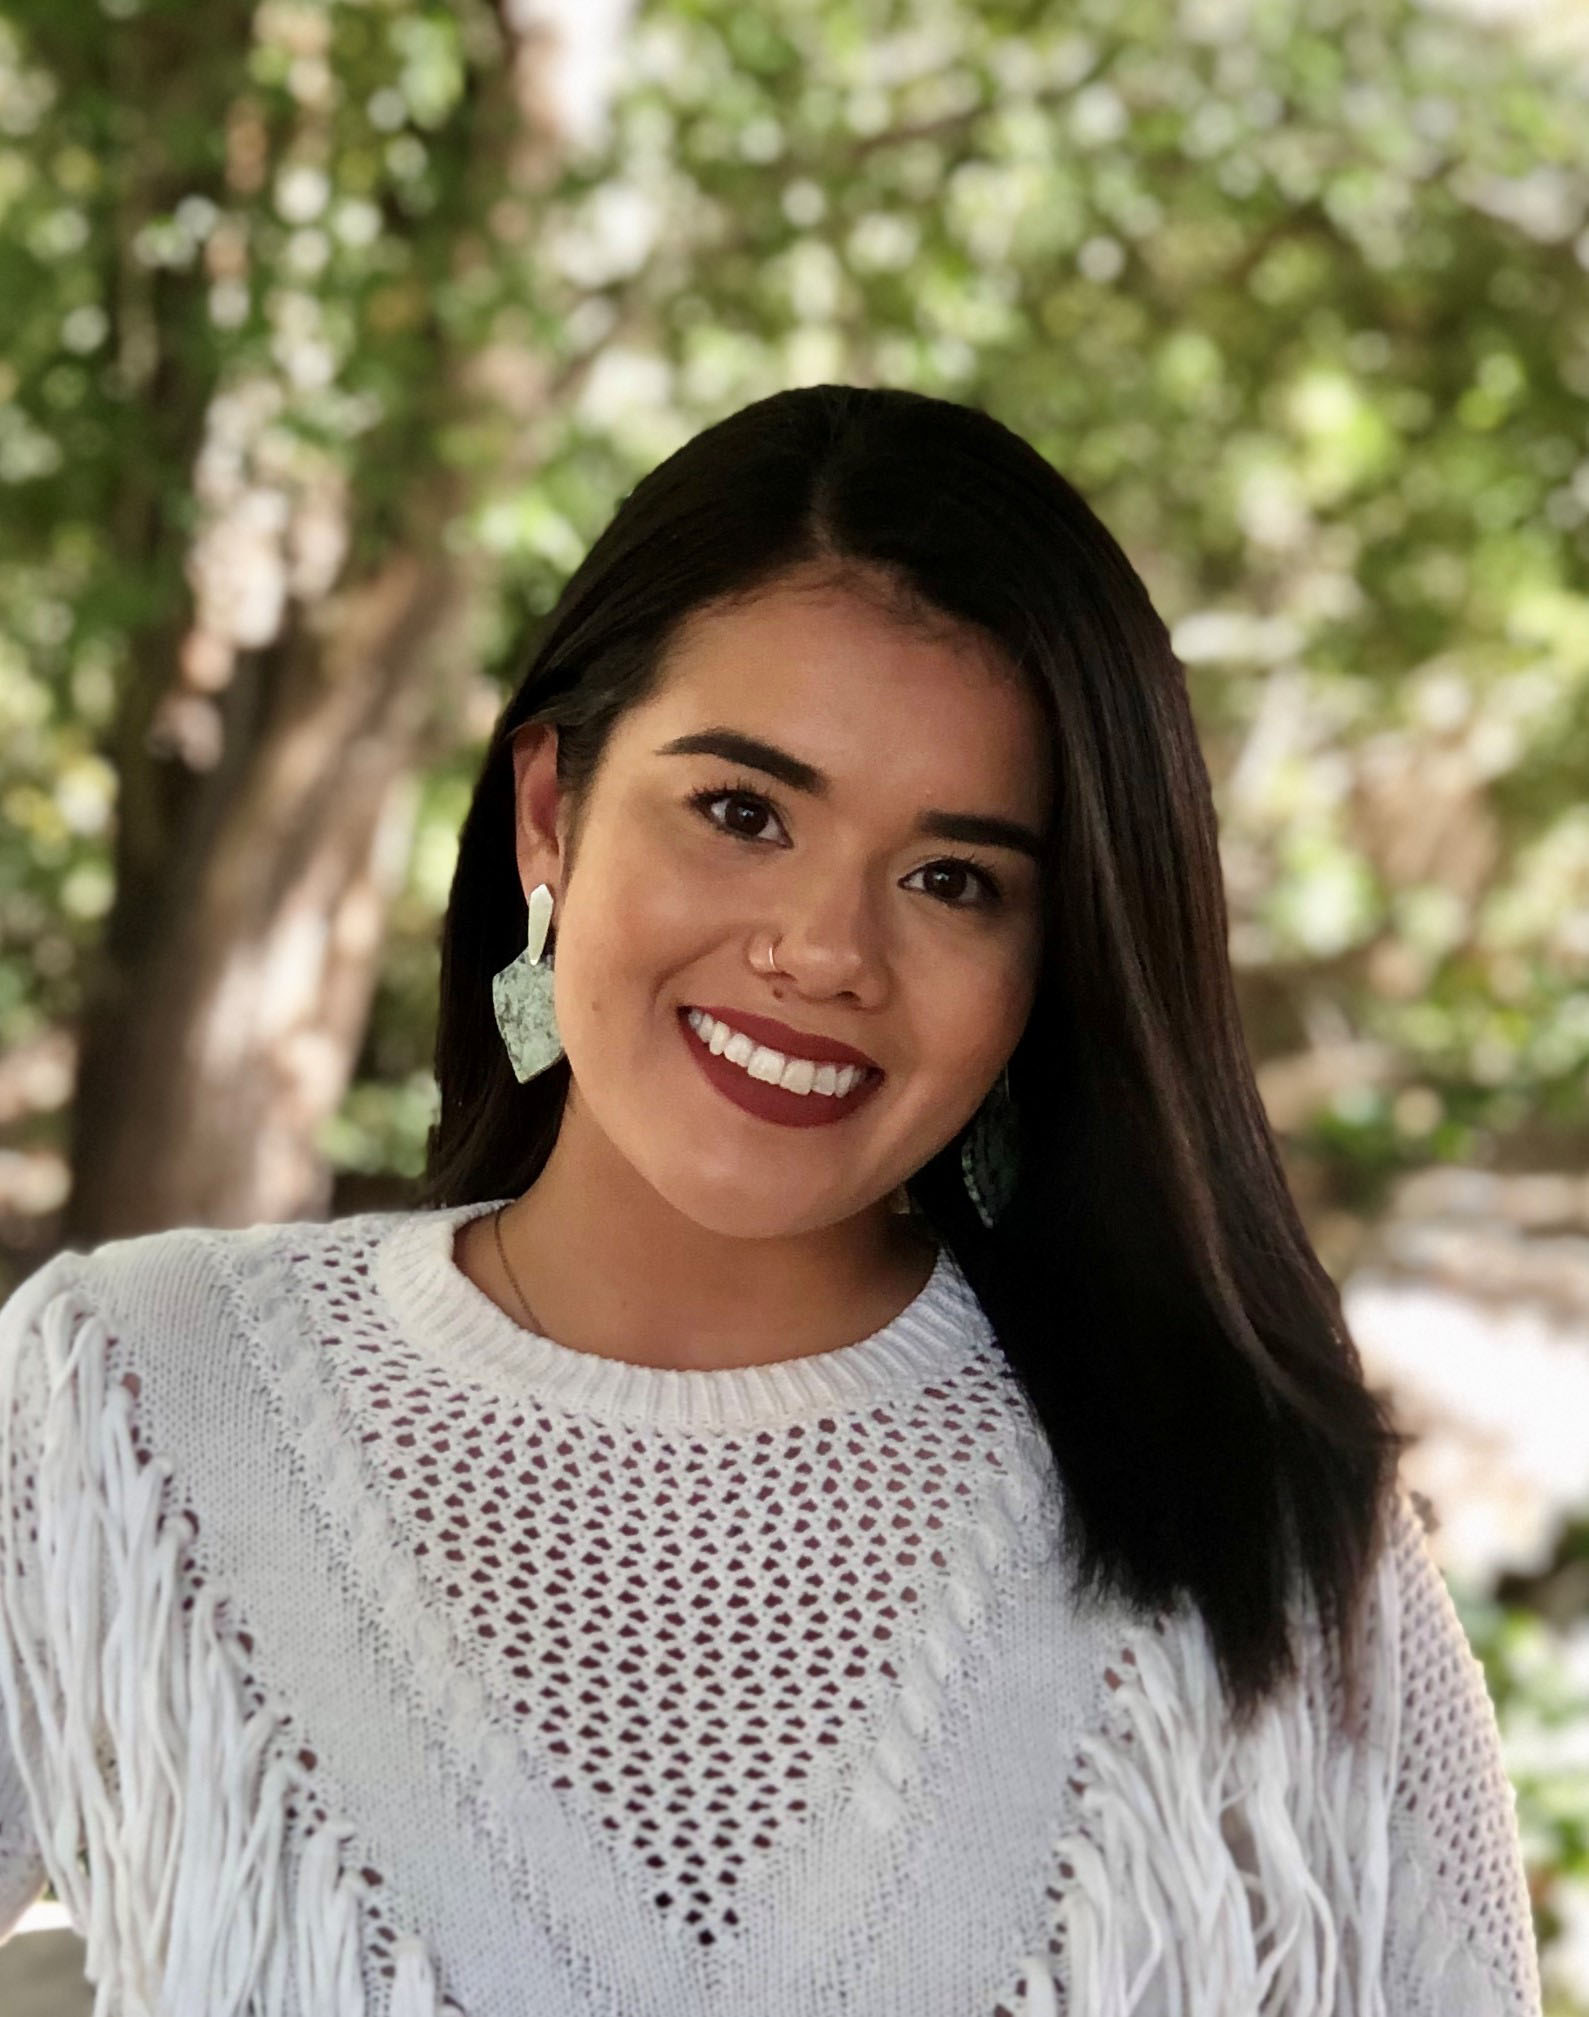 Photograph of Perla Torres, A portrait of Perla Torres, a young Latina with shoulder-length, smooth dark brown hair. She wears dark red lipstick, a knit top, a nose ring, and big stone earrings as she sweetly smiles a big grin towards the camera.